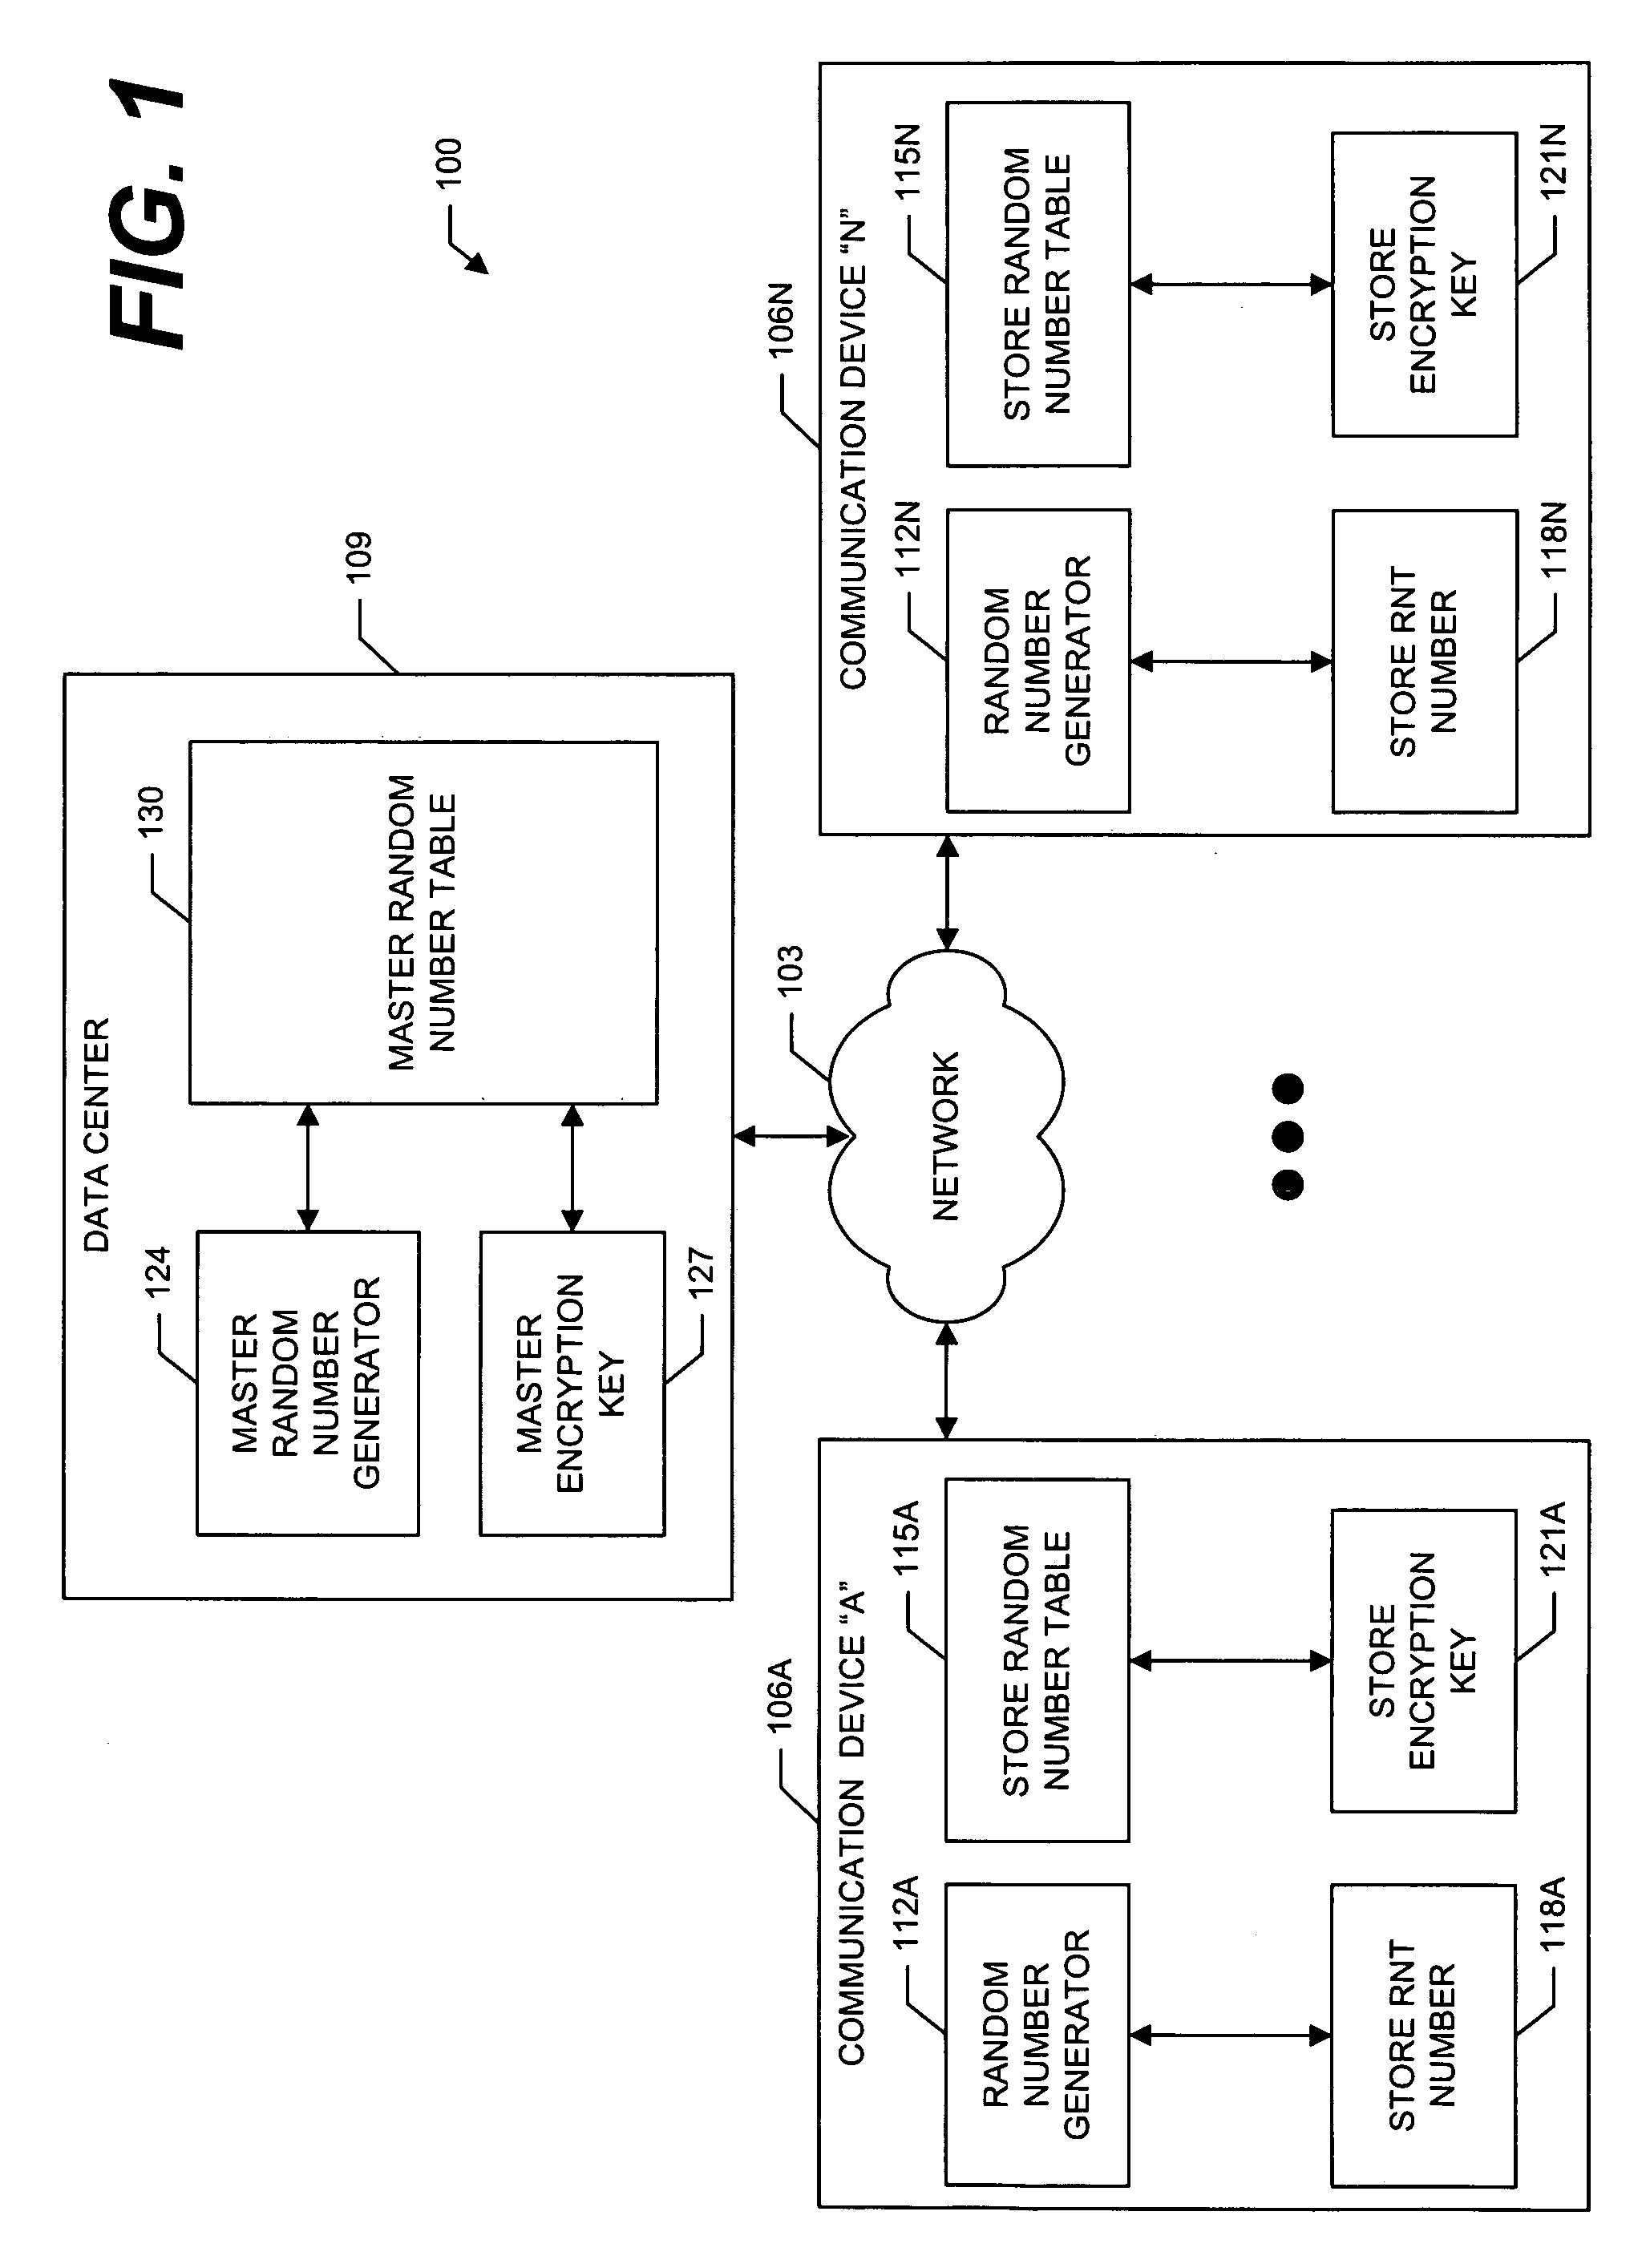 System and methods for encrypting data utilizing one-time pad key